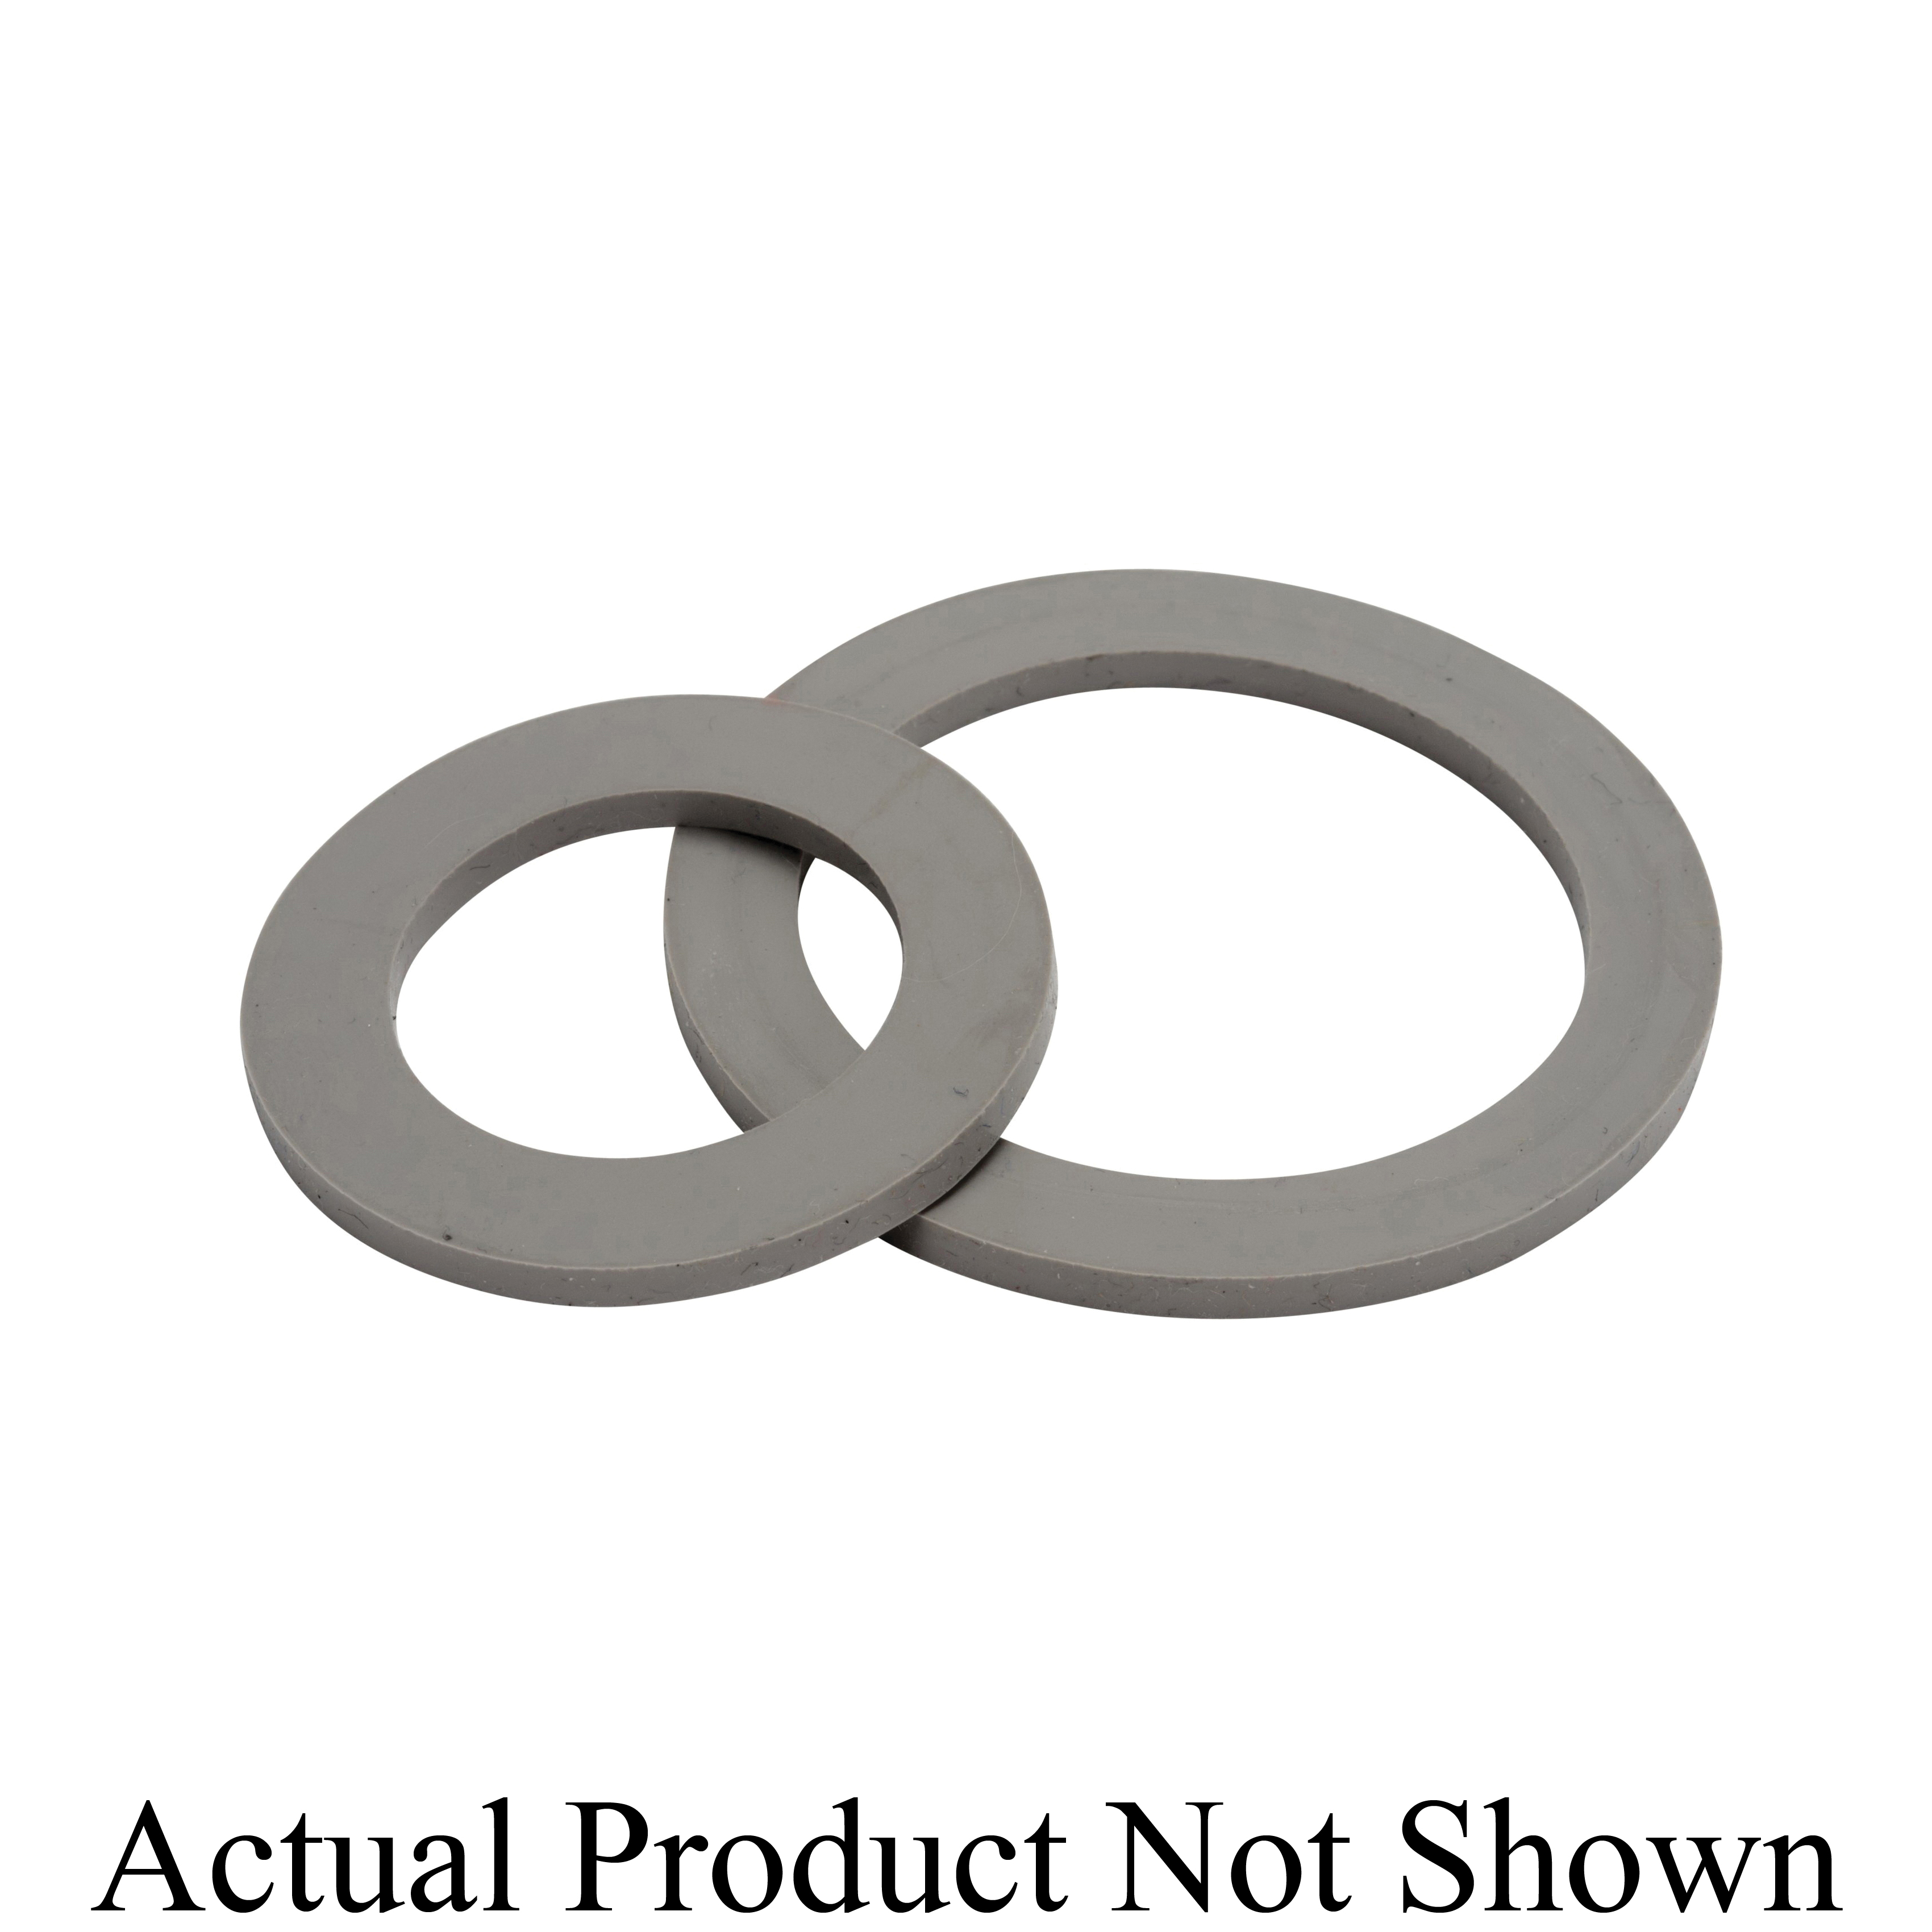 3M™ 051131-07145 Inhalation Replacement Gasket, For Use With 6000 Series Half Facepiece Respirators, Orange